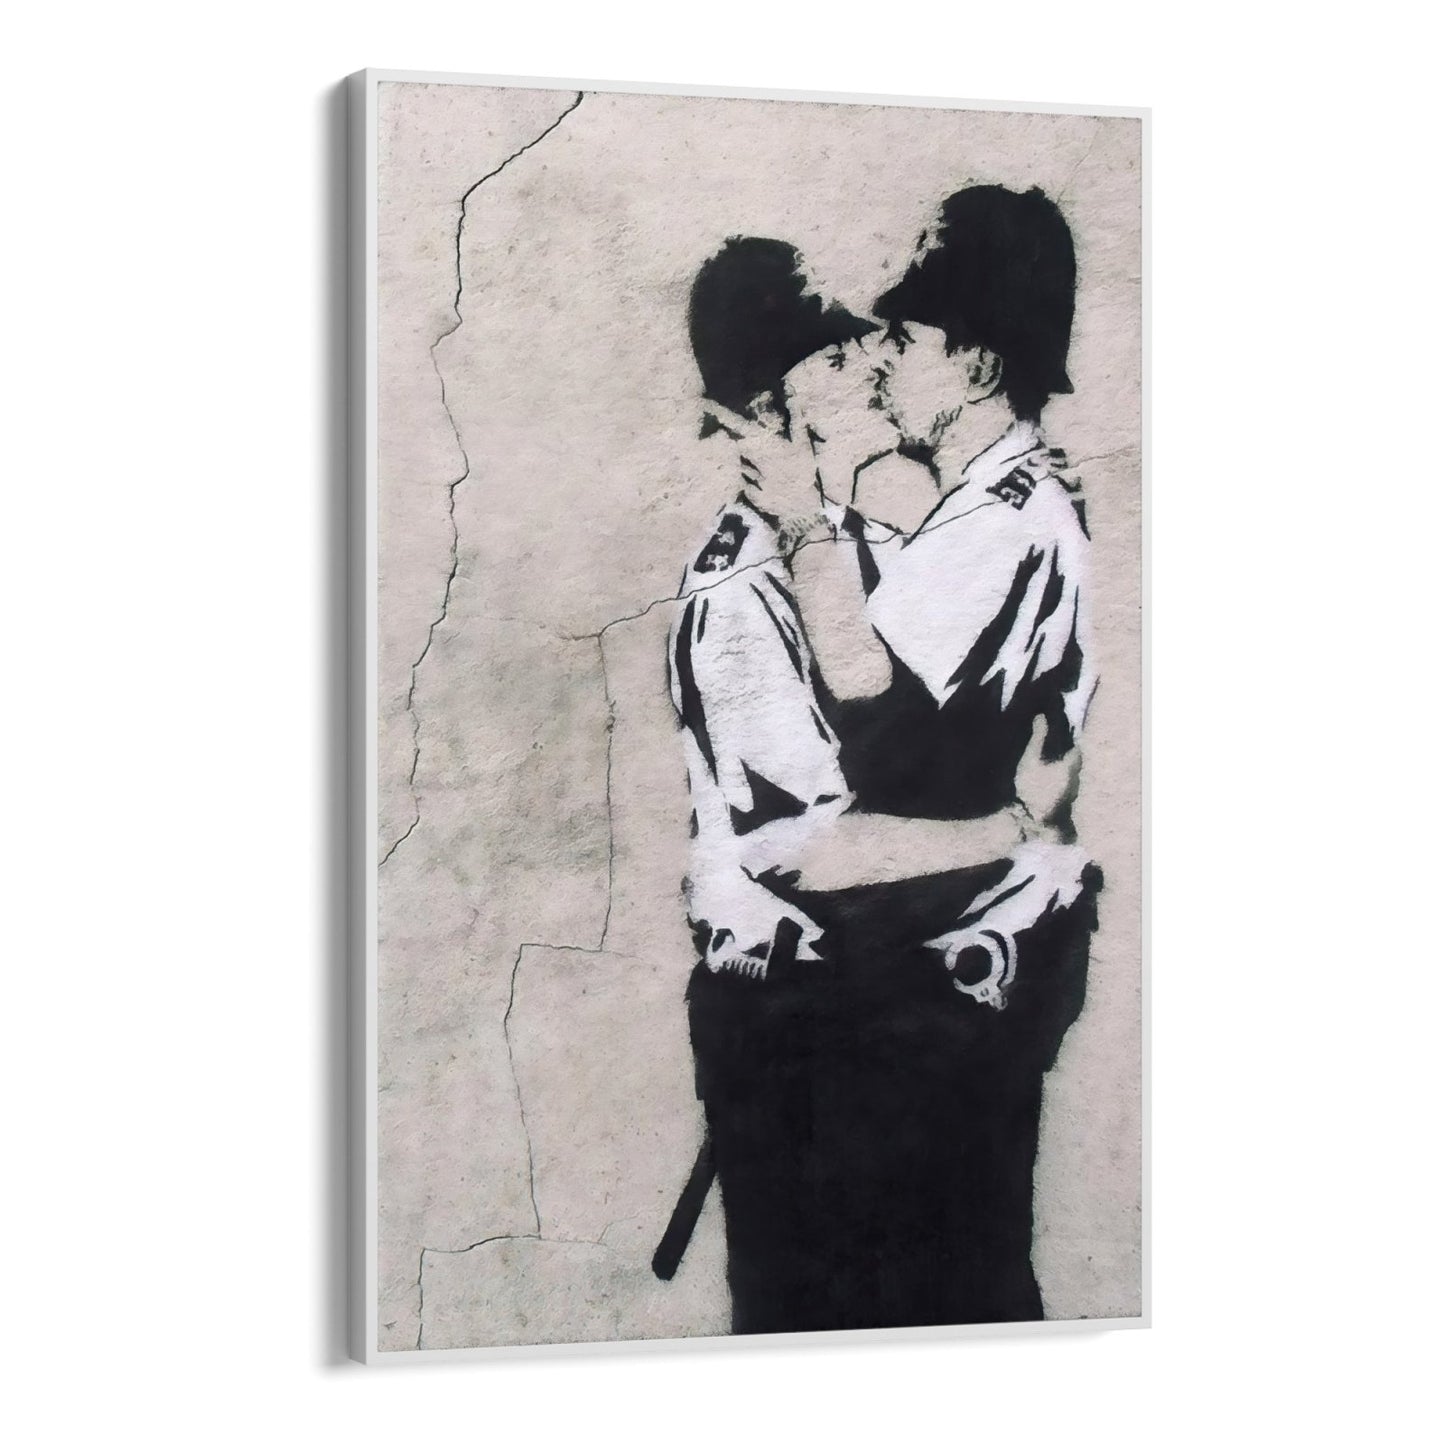 Kissing Coppers, Banksy